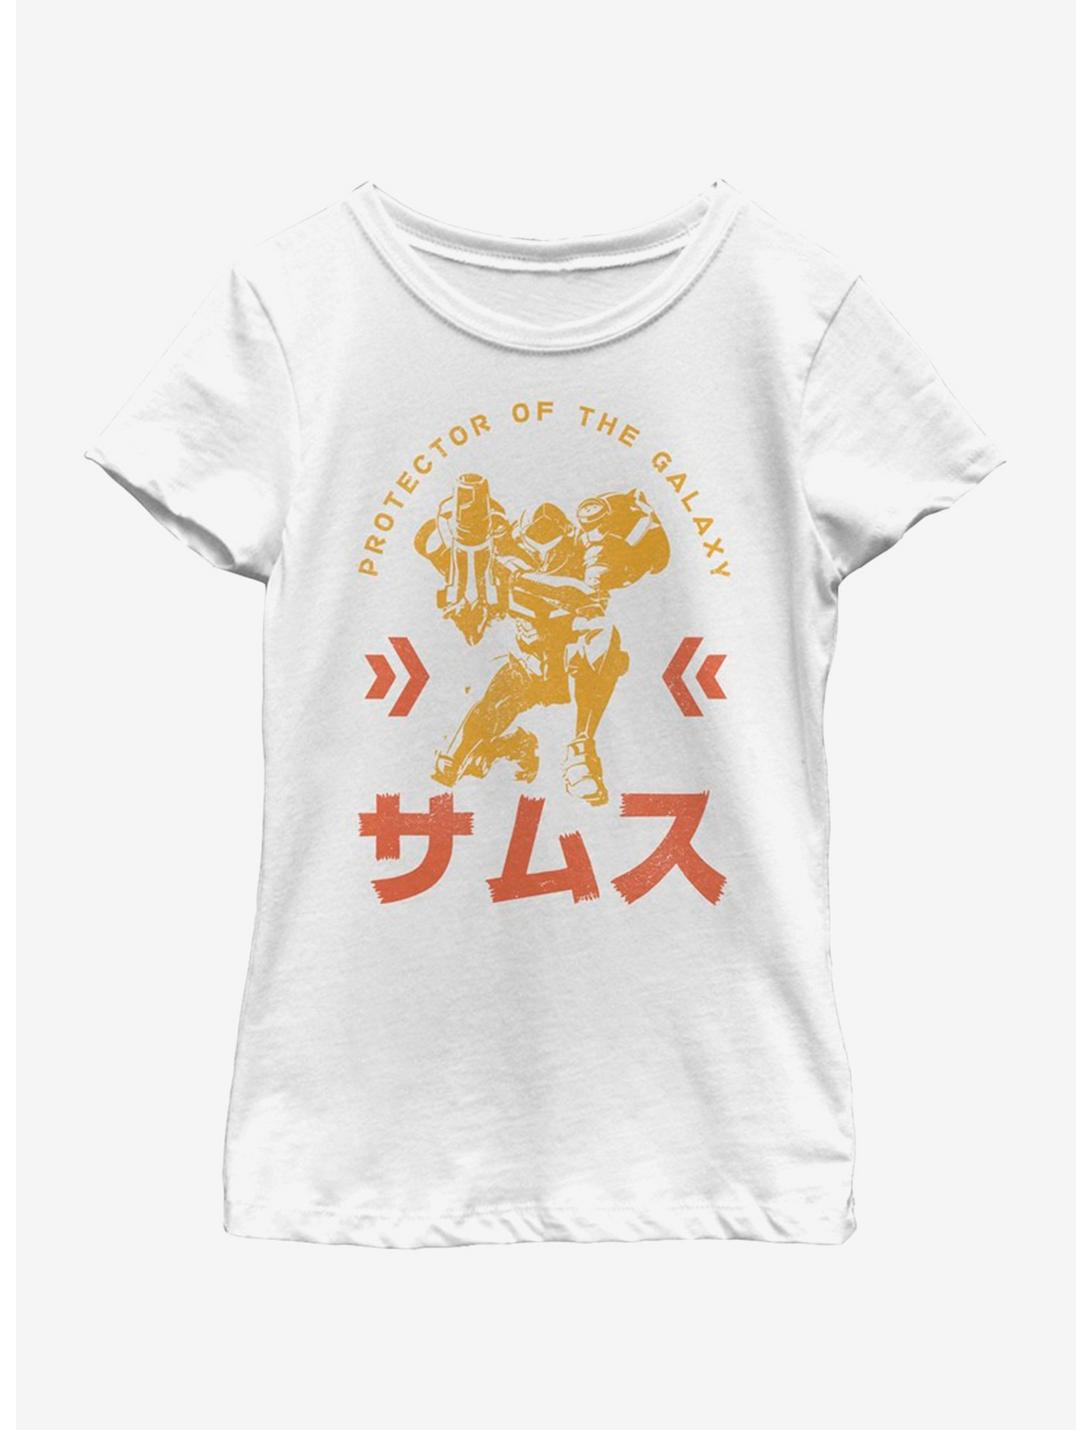 Nintendo Protector Of The Galaxy Youth Girls T-Shirt, WHITE, hi-res